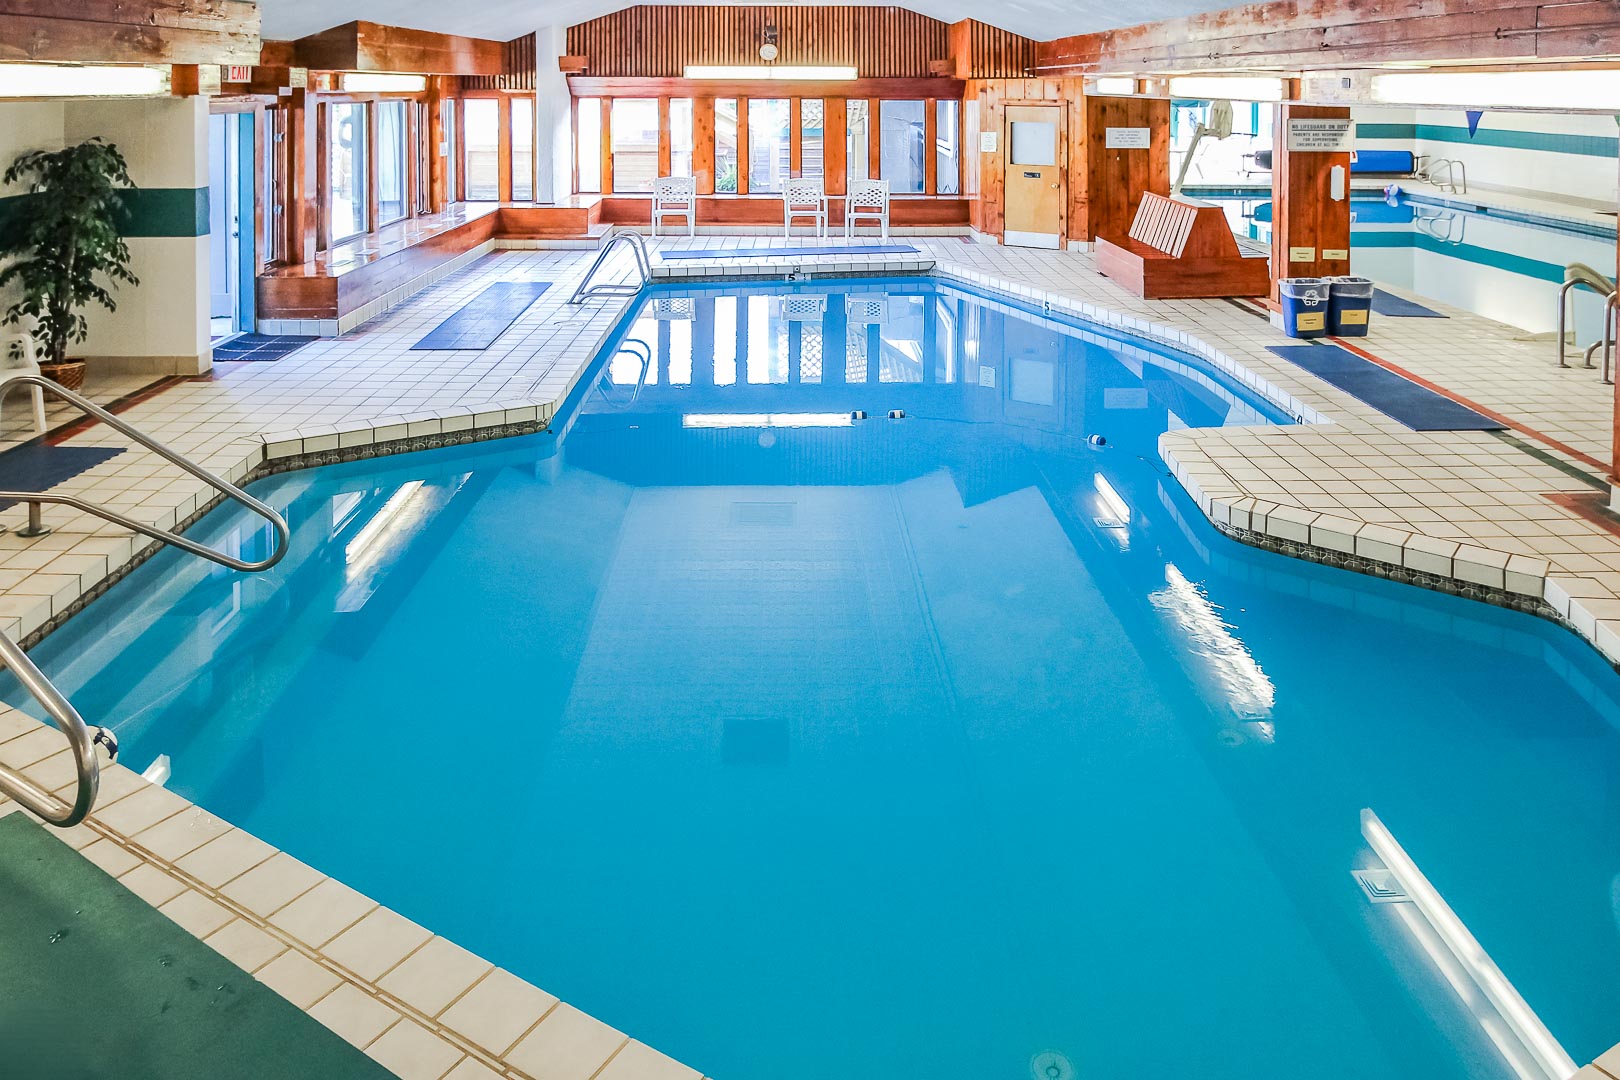 A peaceful indoor swimming pool at VRI's Village of Loon Mountain in New Hampshire.